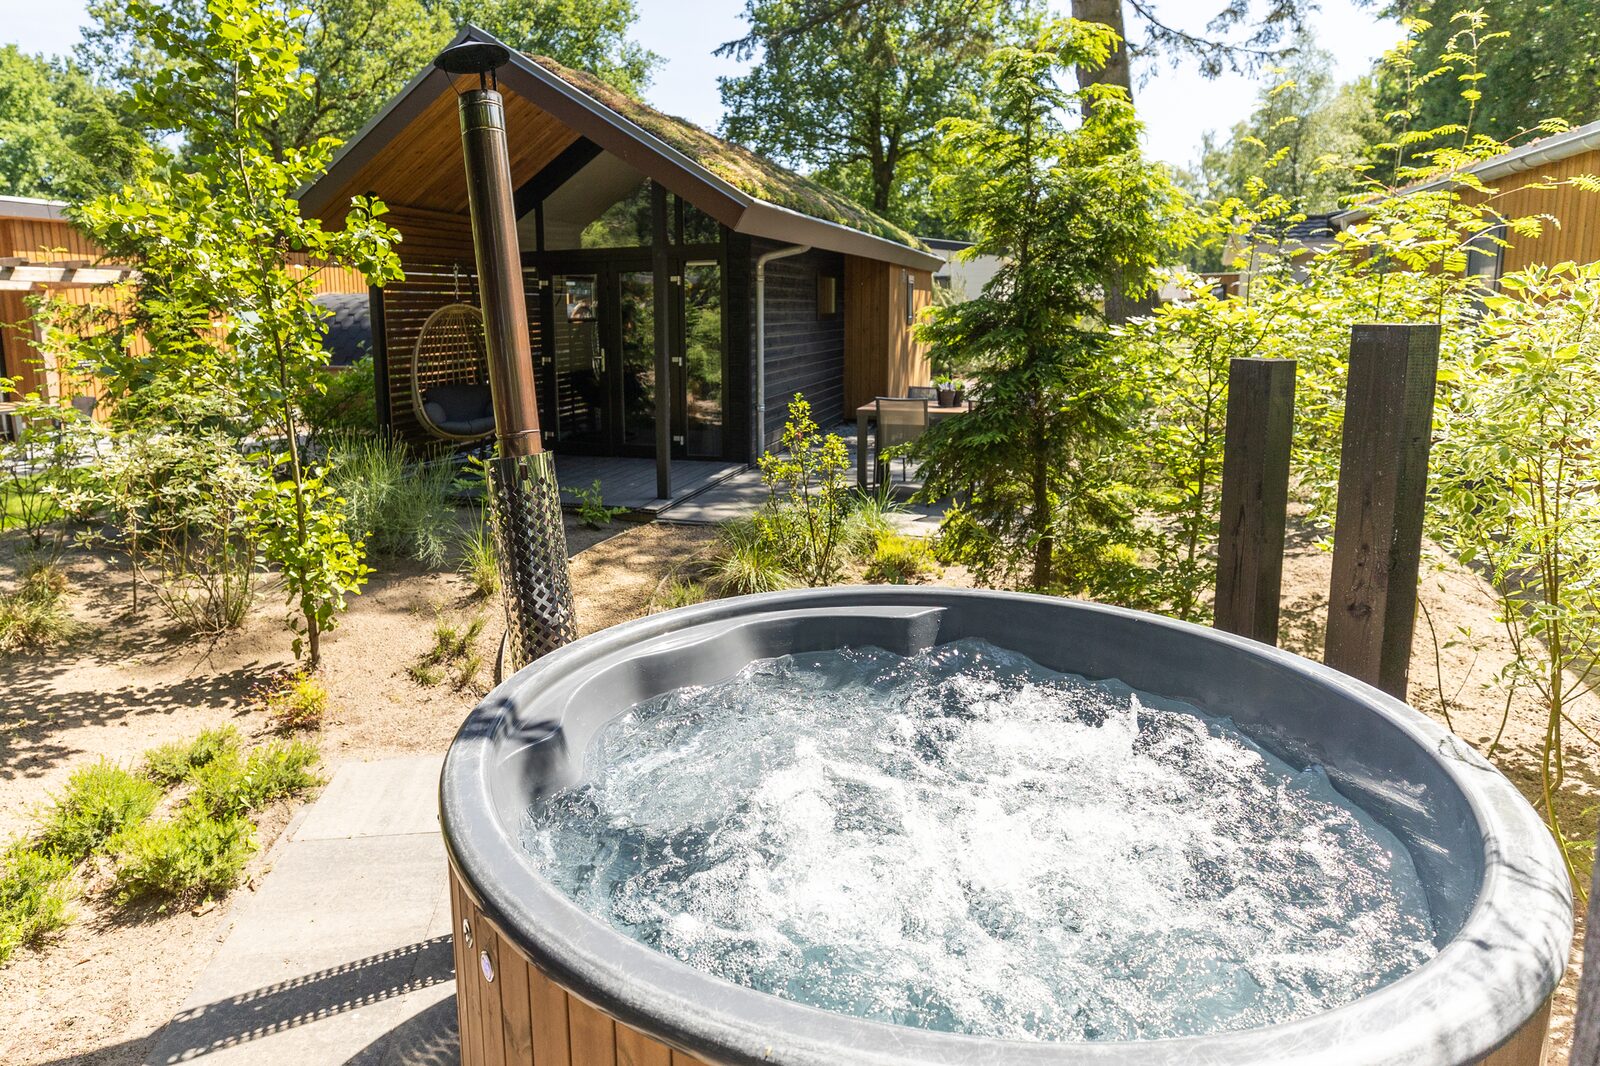 Tiny Lodge Eco 4 people with Hot tub